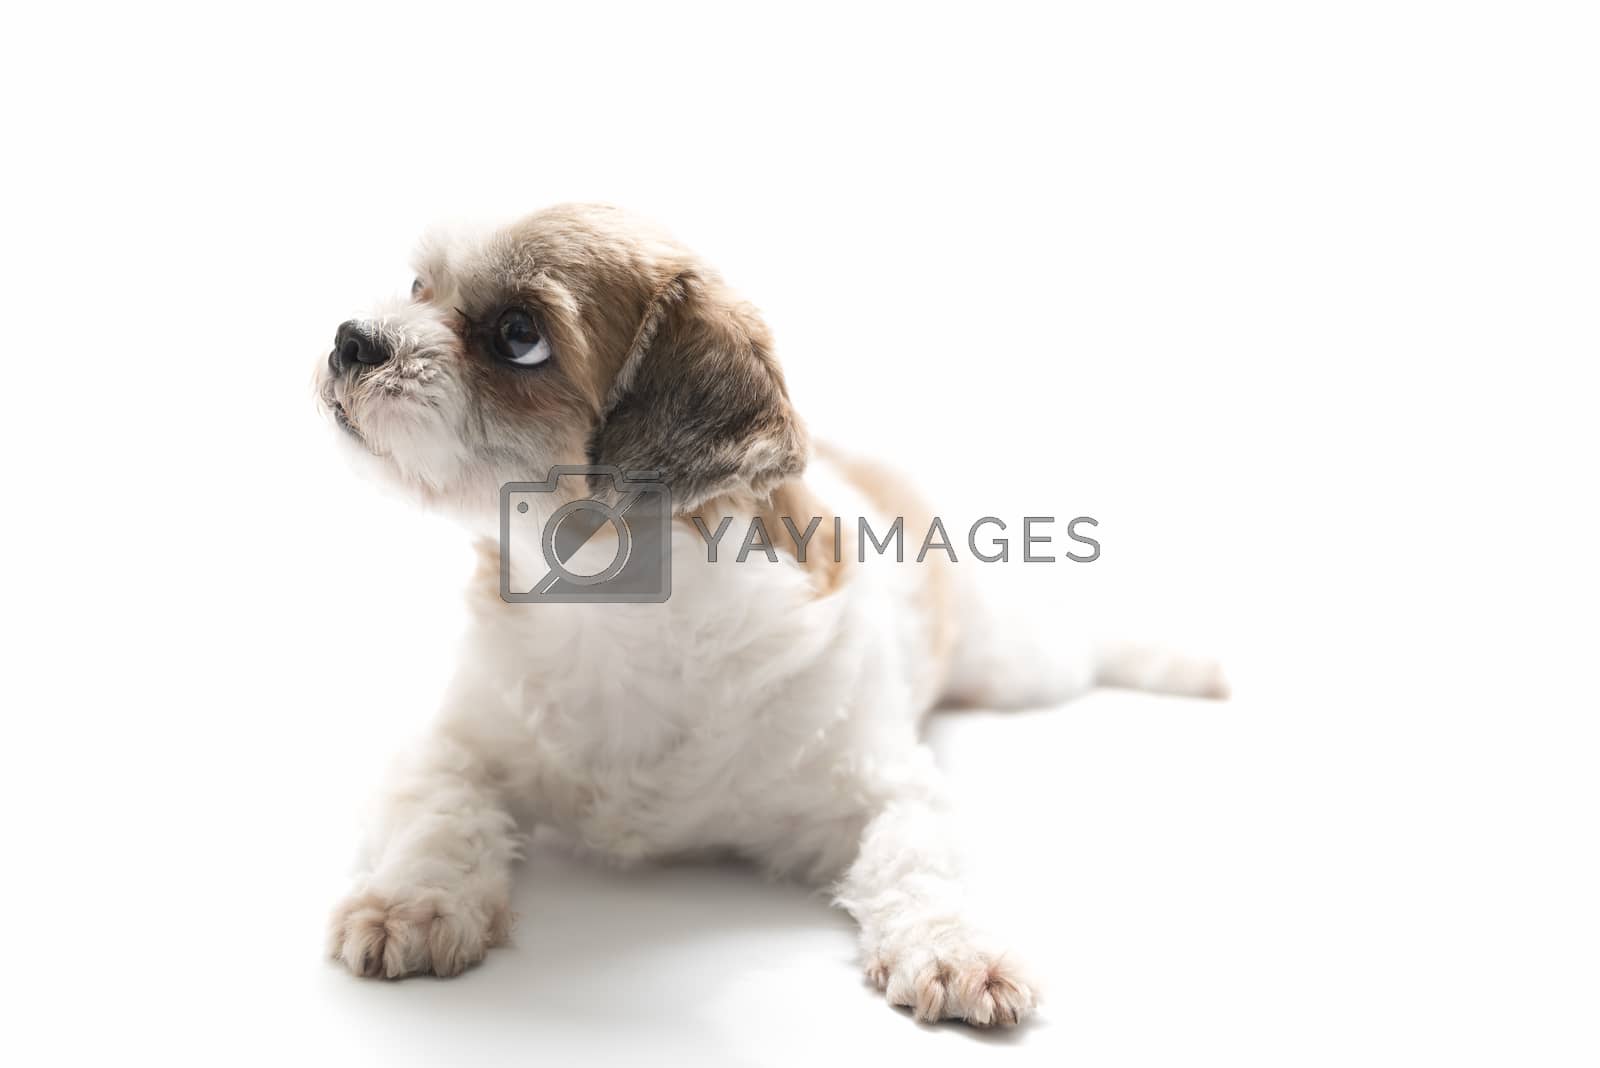 Royalty free image of puppy dog by ammza12